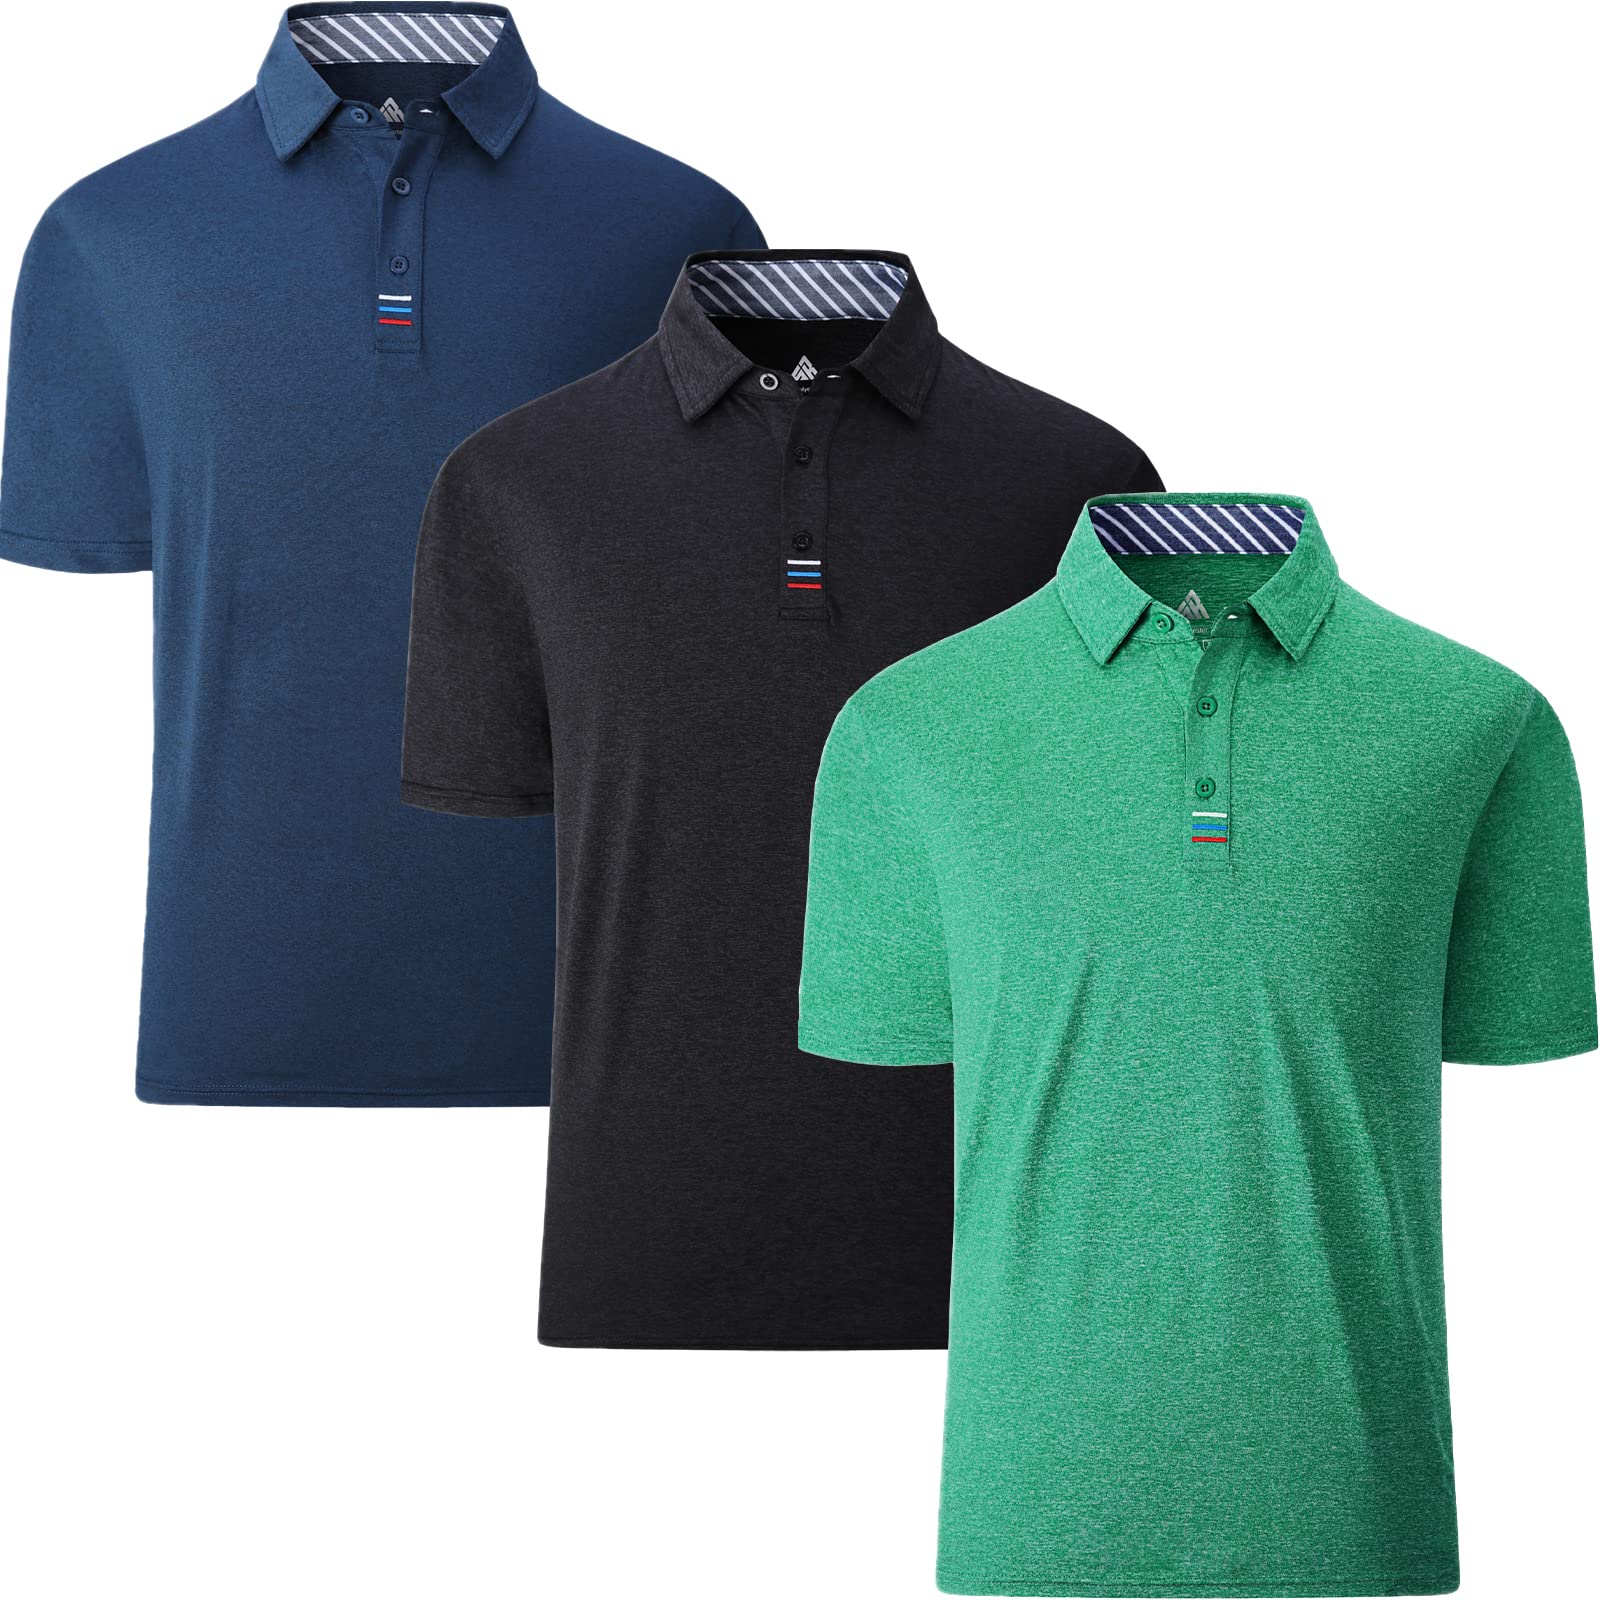 SWISSWELL Polo Shirts for Men 3 Pack Short Sleeve Performance Golf Shirt Summer Casual Collared Shirts